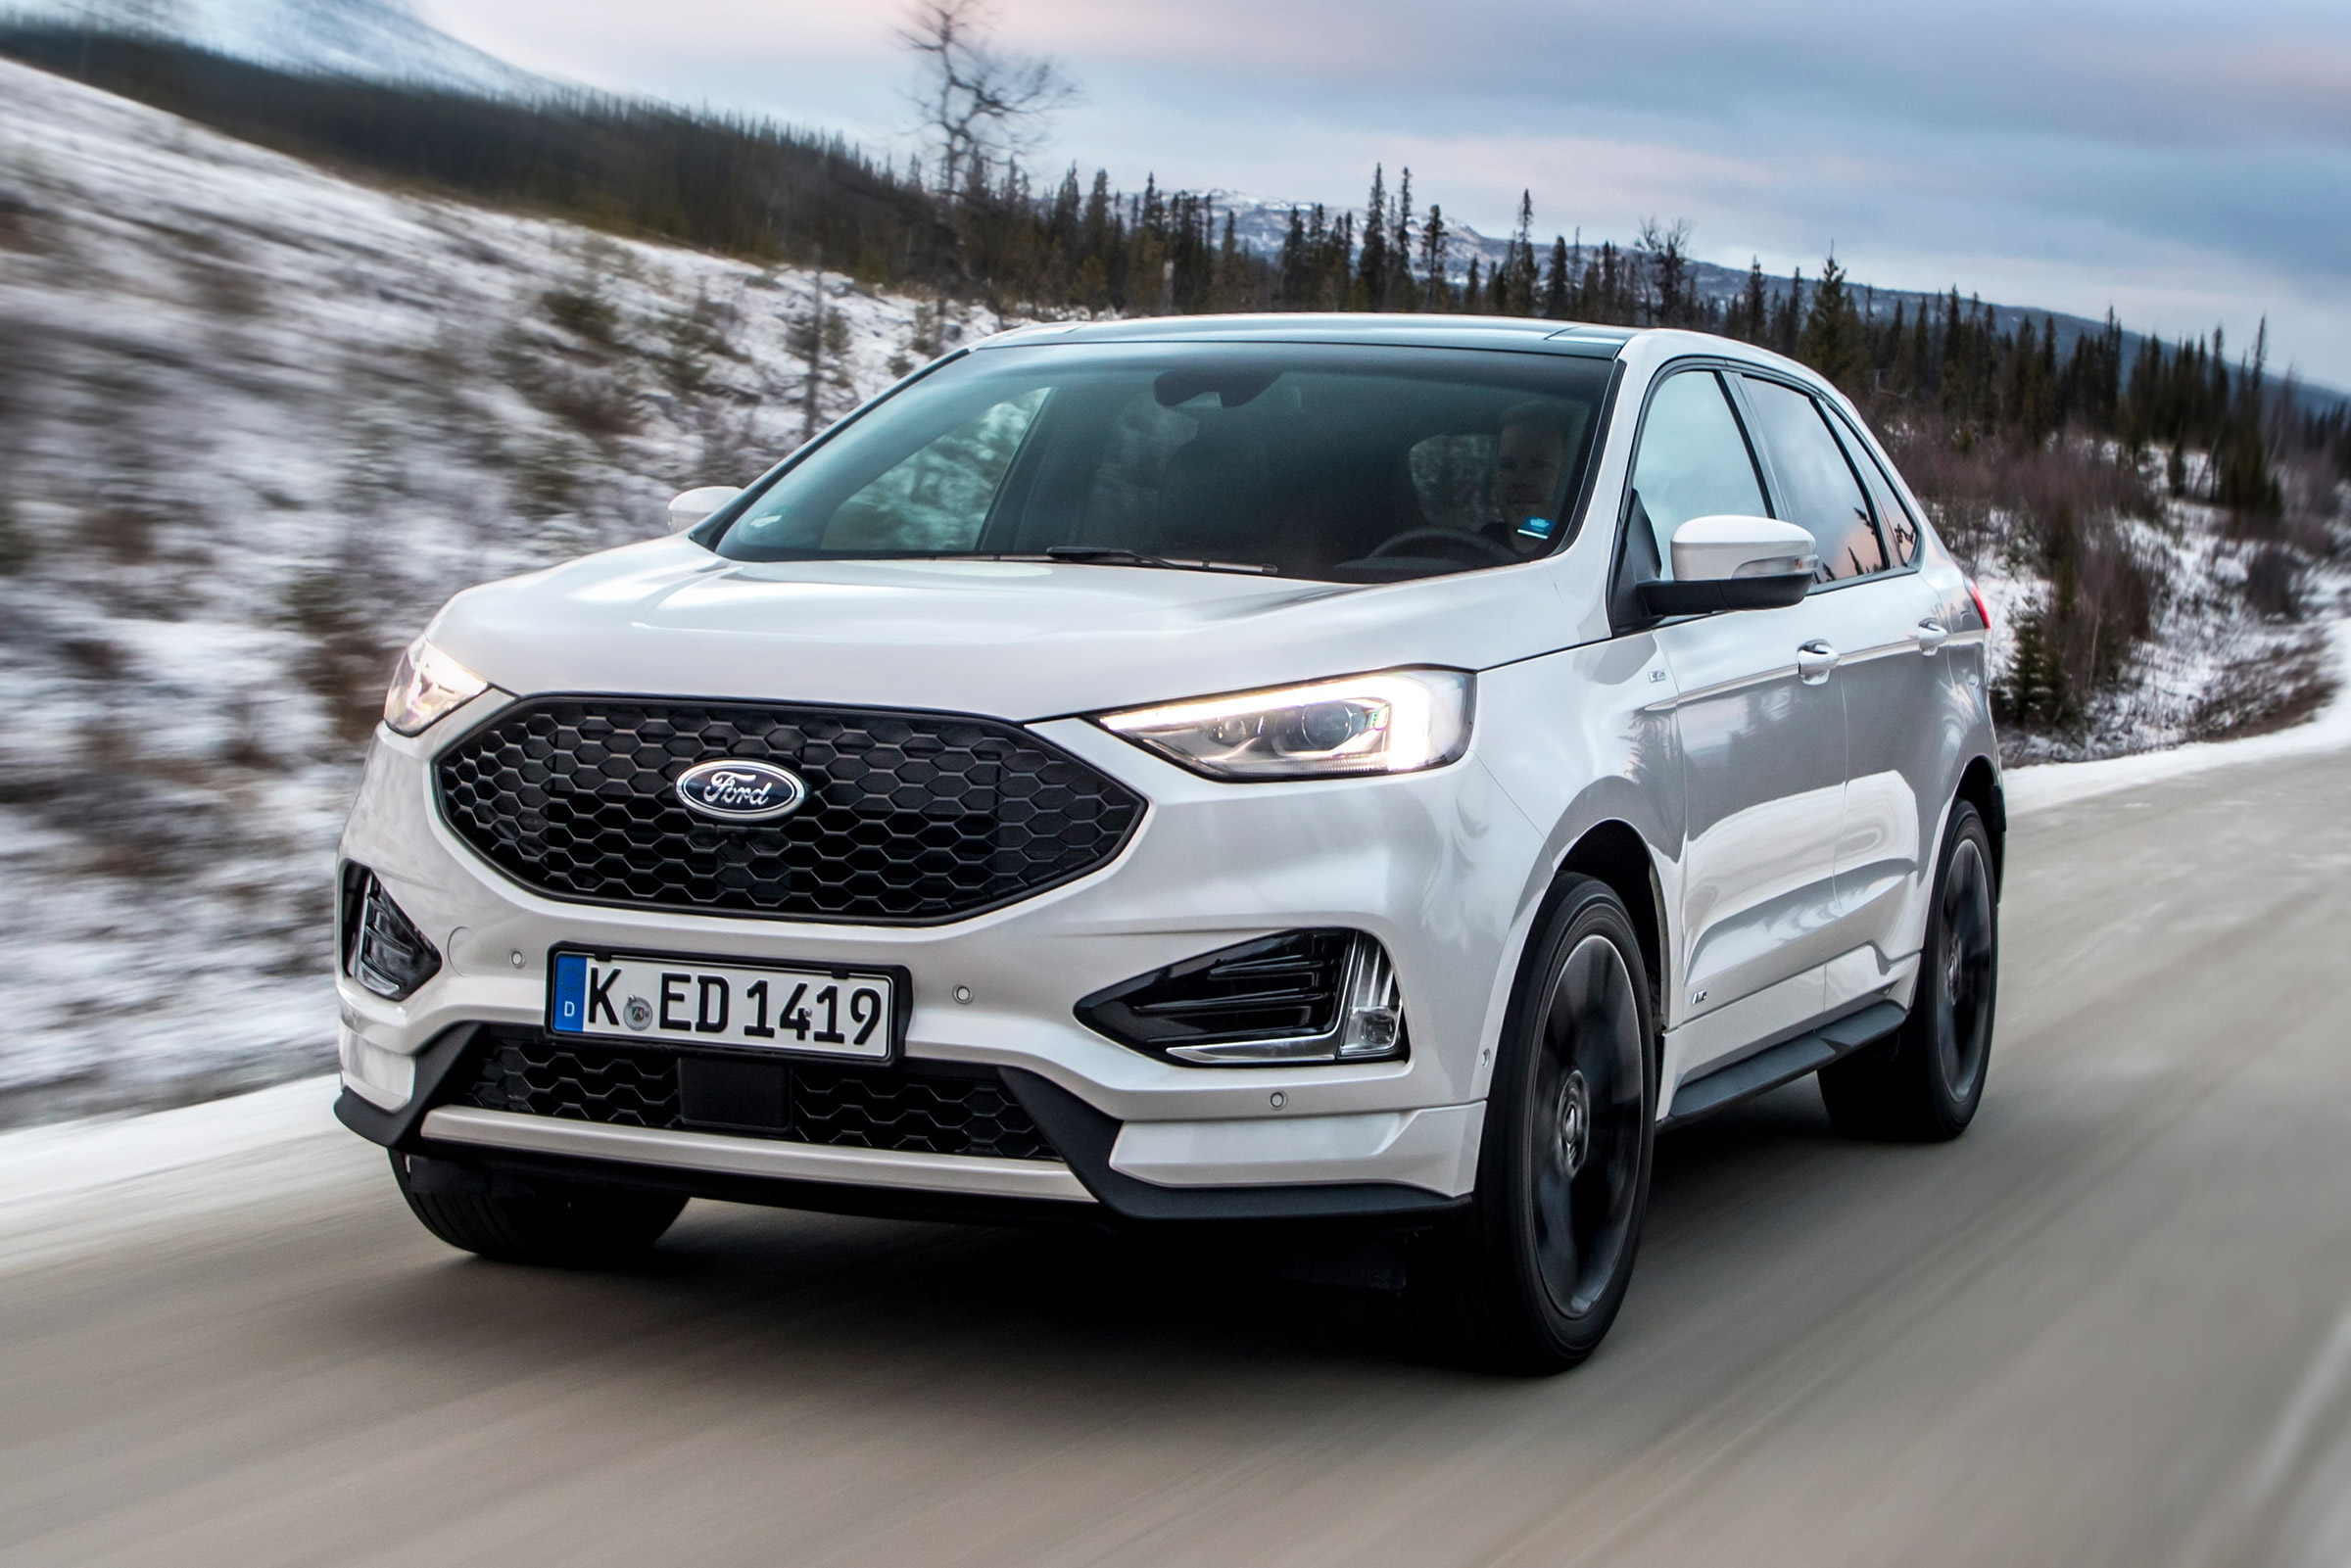 Ford Edge SUV 2019 review gallery | Carbuyer